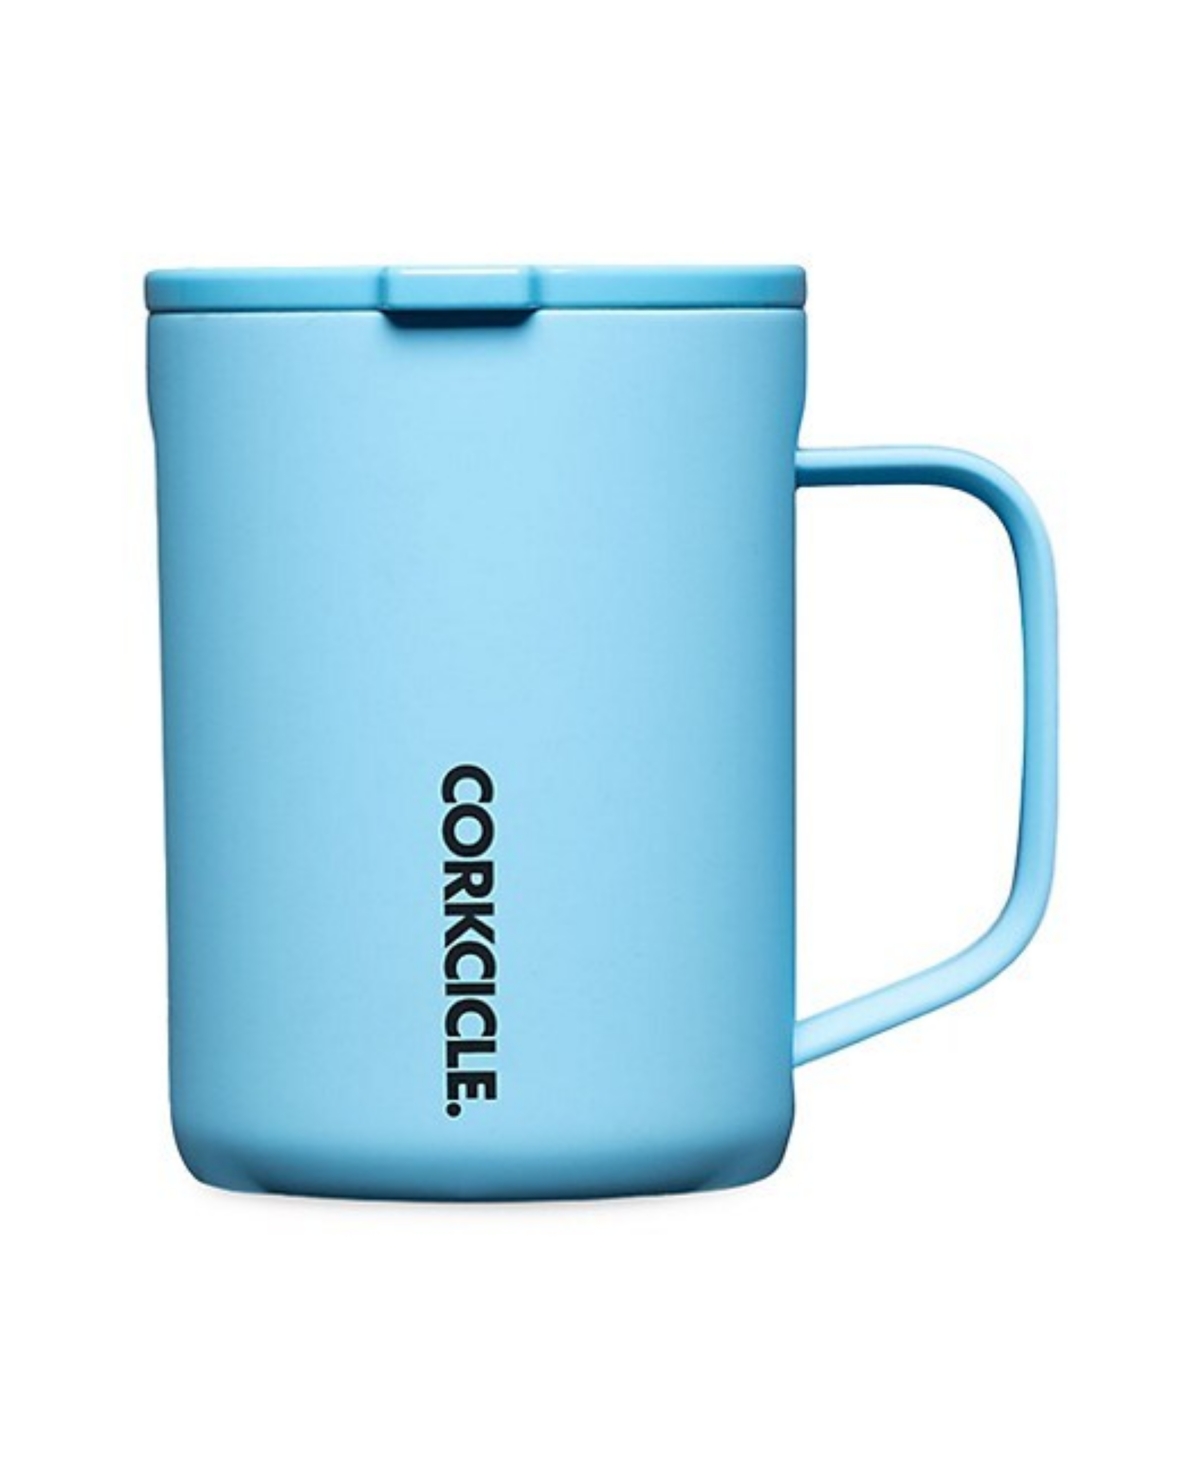 Corkcicle 16-oz. Santorini Insulated Stainless Steel Mug In No Color